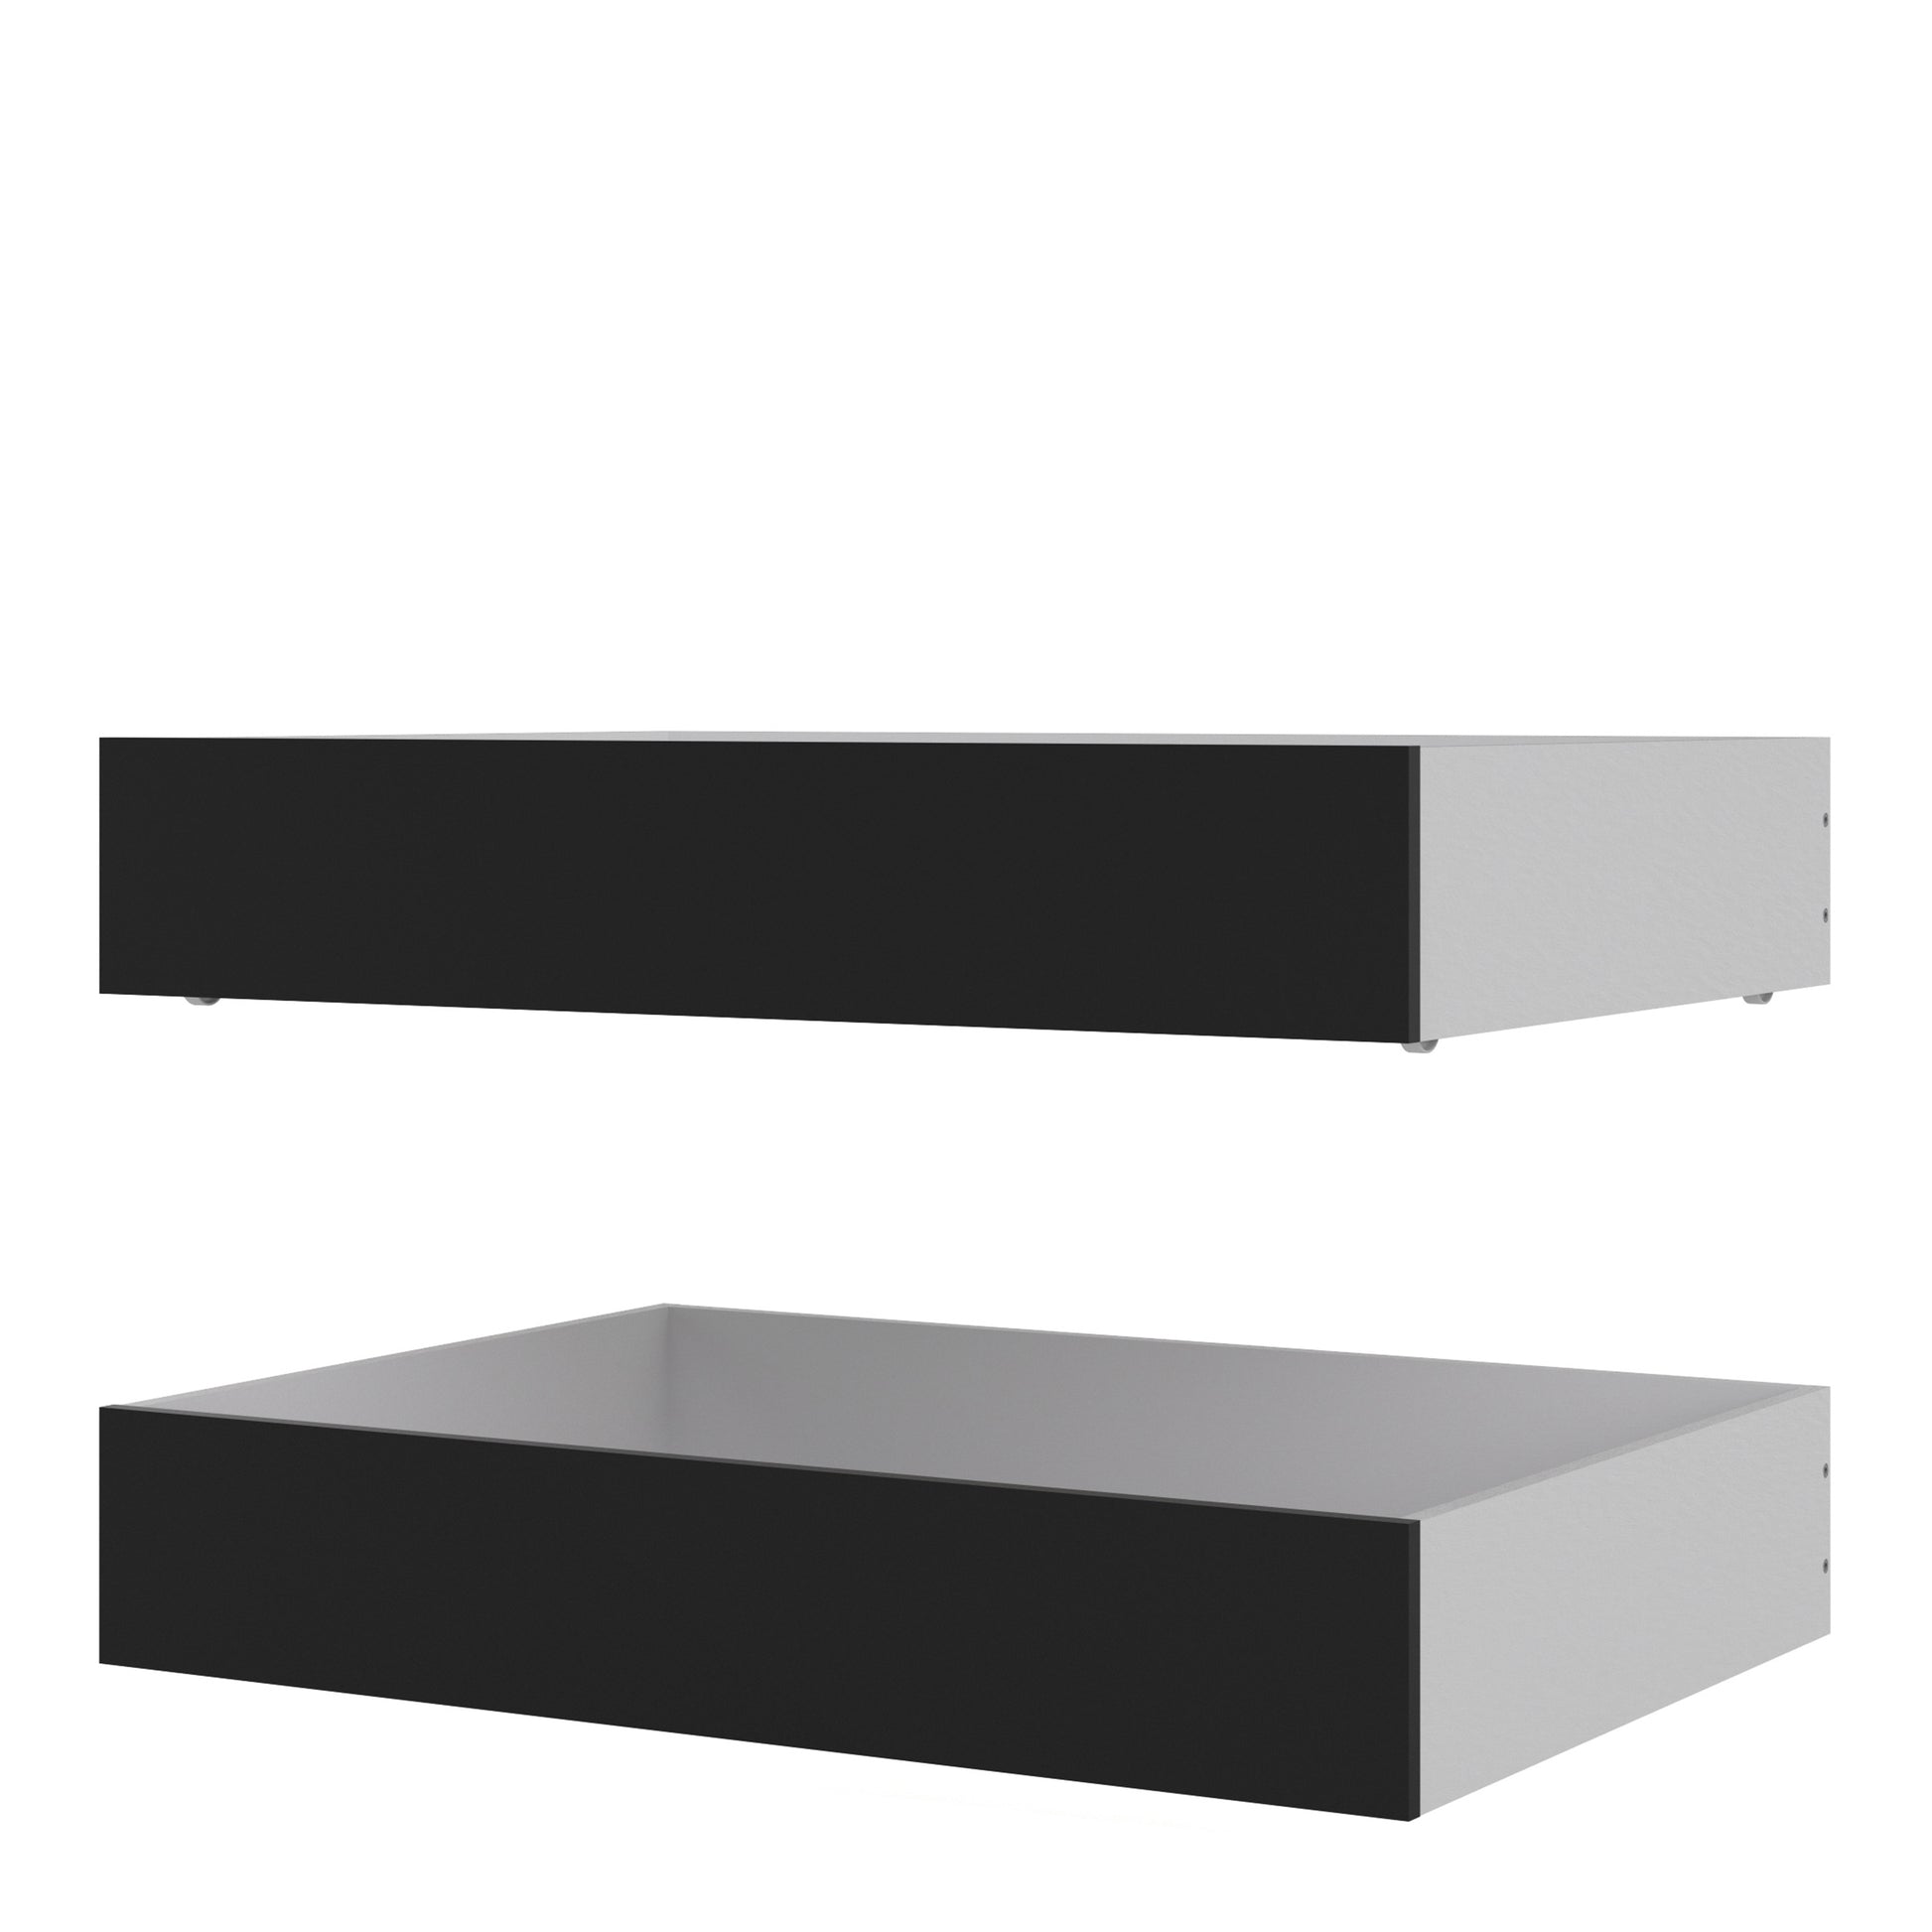 Naia  Set of 2 Underbed Drawers (for Single or Double beds) in Black Matt